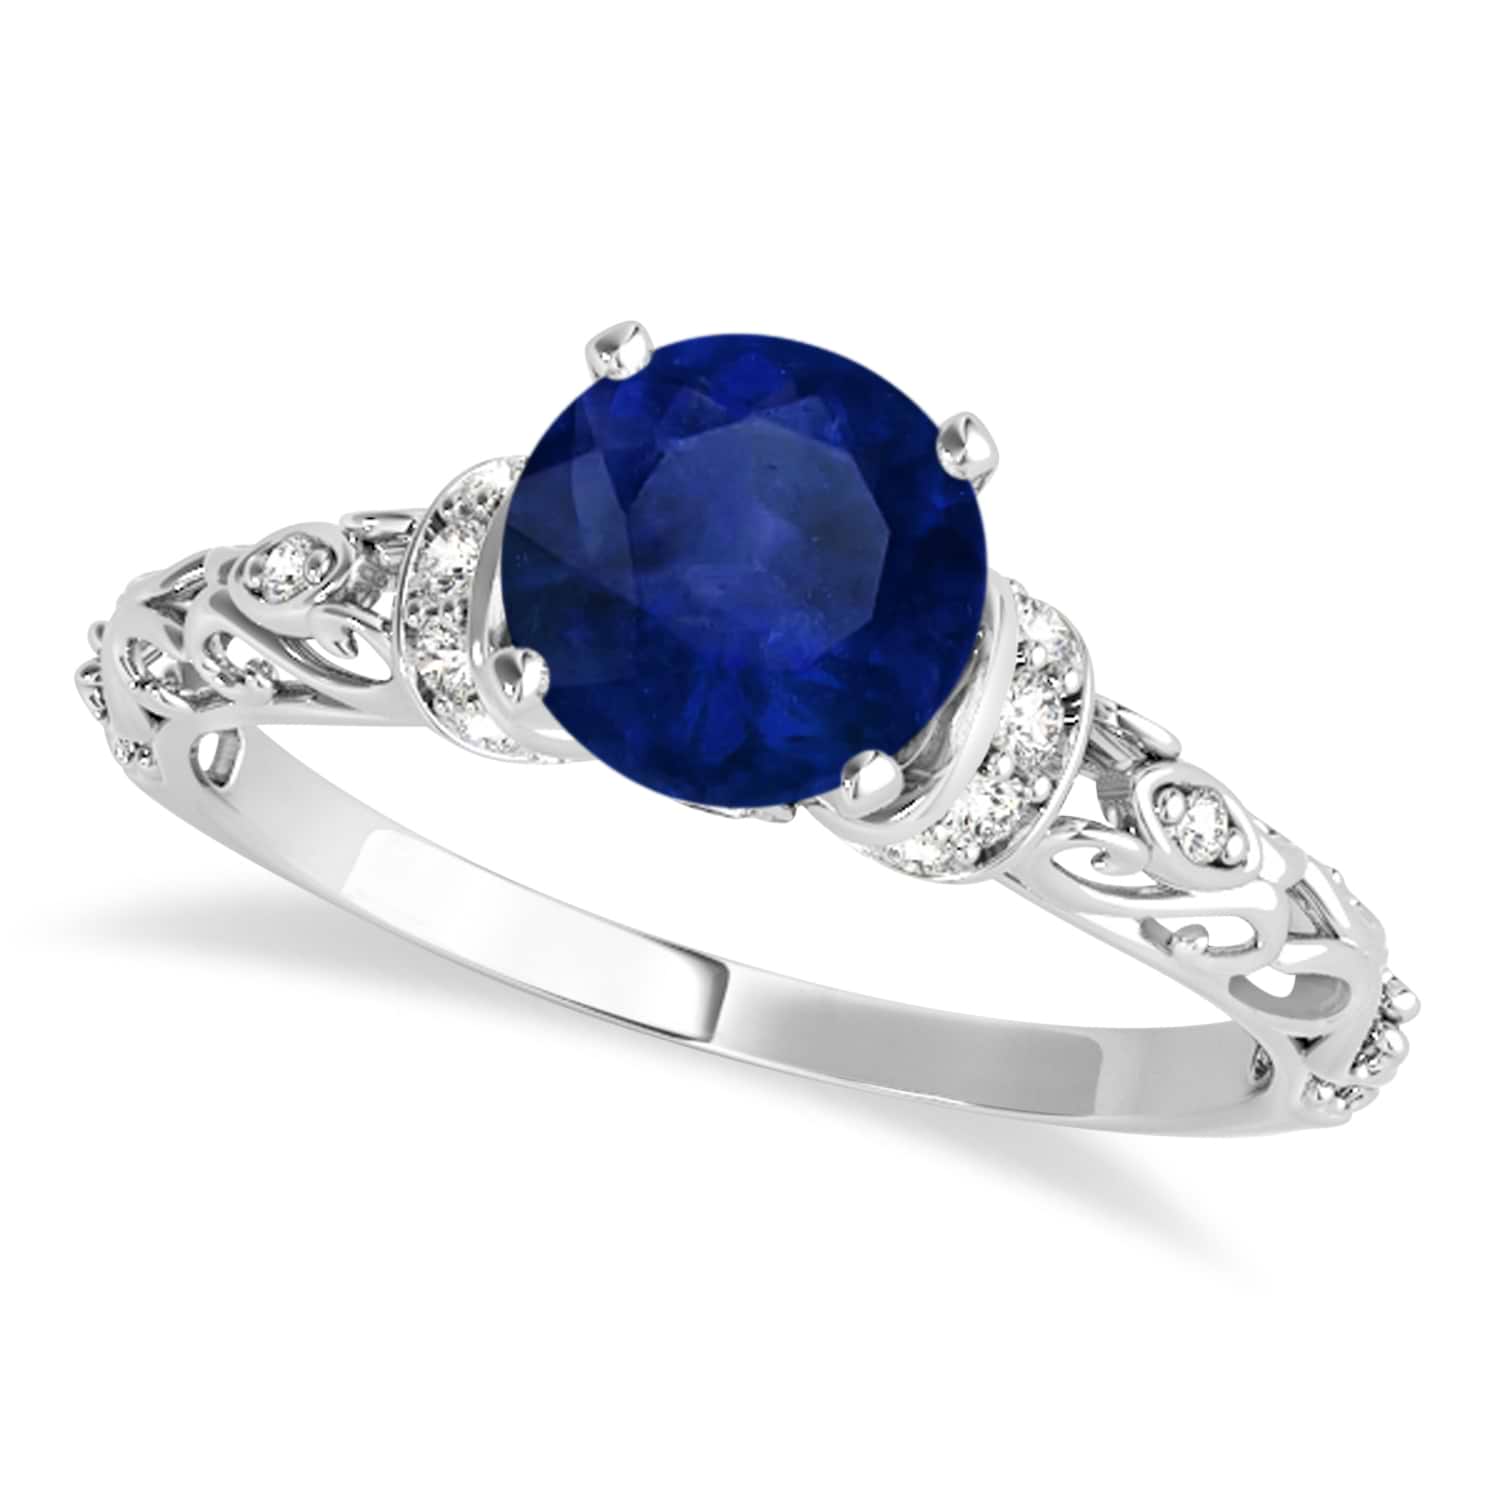 Blue Sapphire & Diamond Antique Style Engagement Ring 18k White Gold (1.62ct)